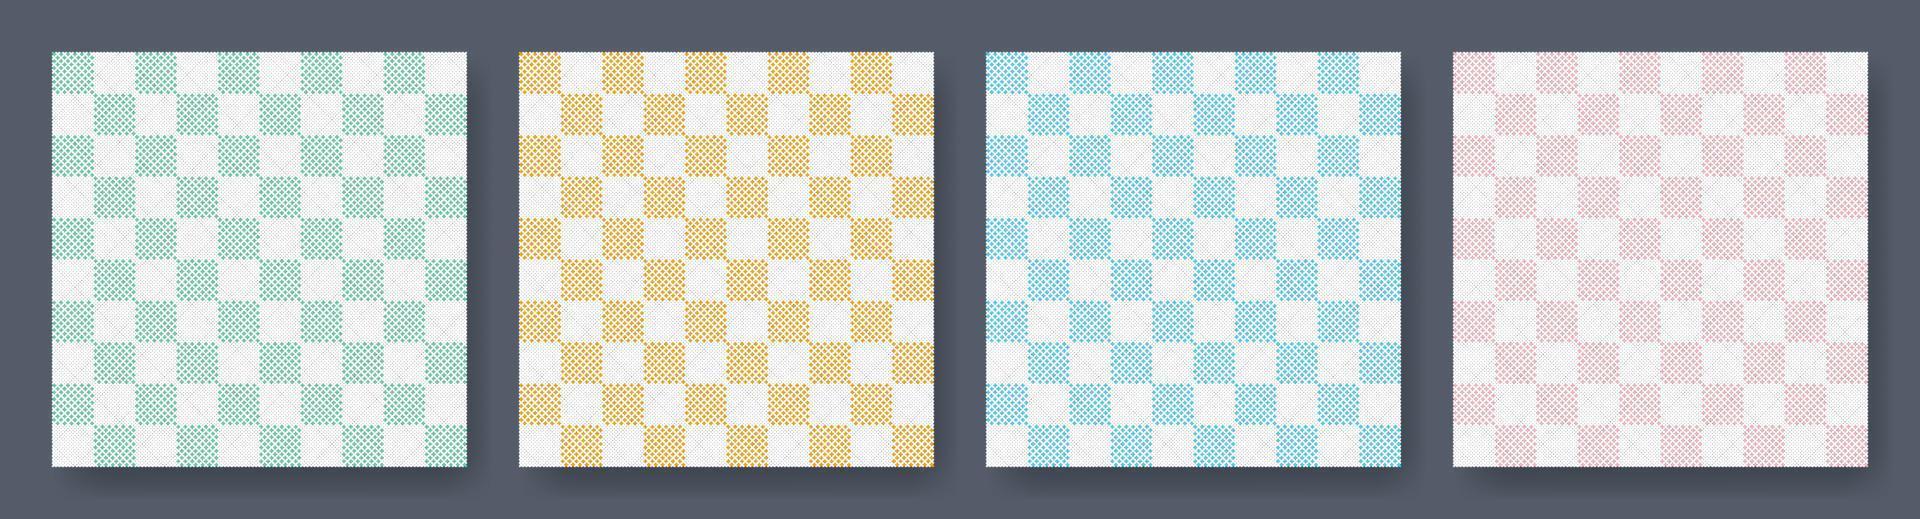 Vichy gingham textures set of patterns. Checkered design. Diagonal background for napkins, towels. Vector illustration.